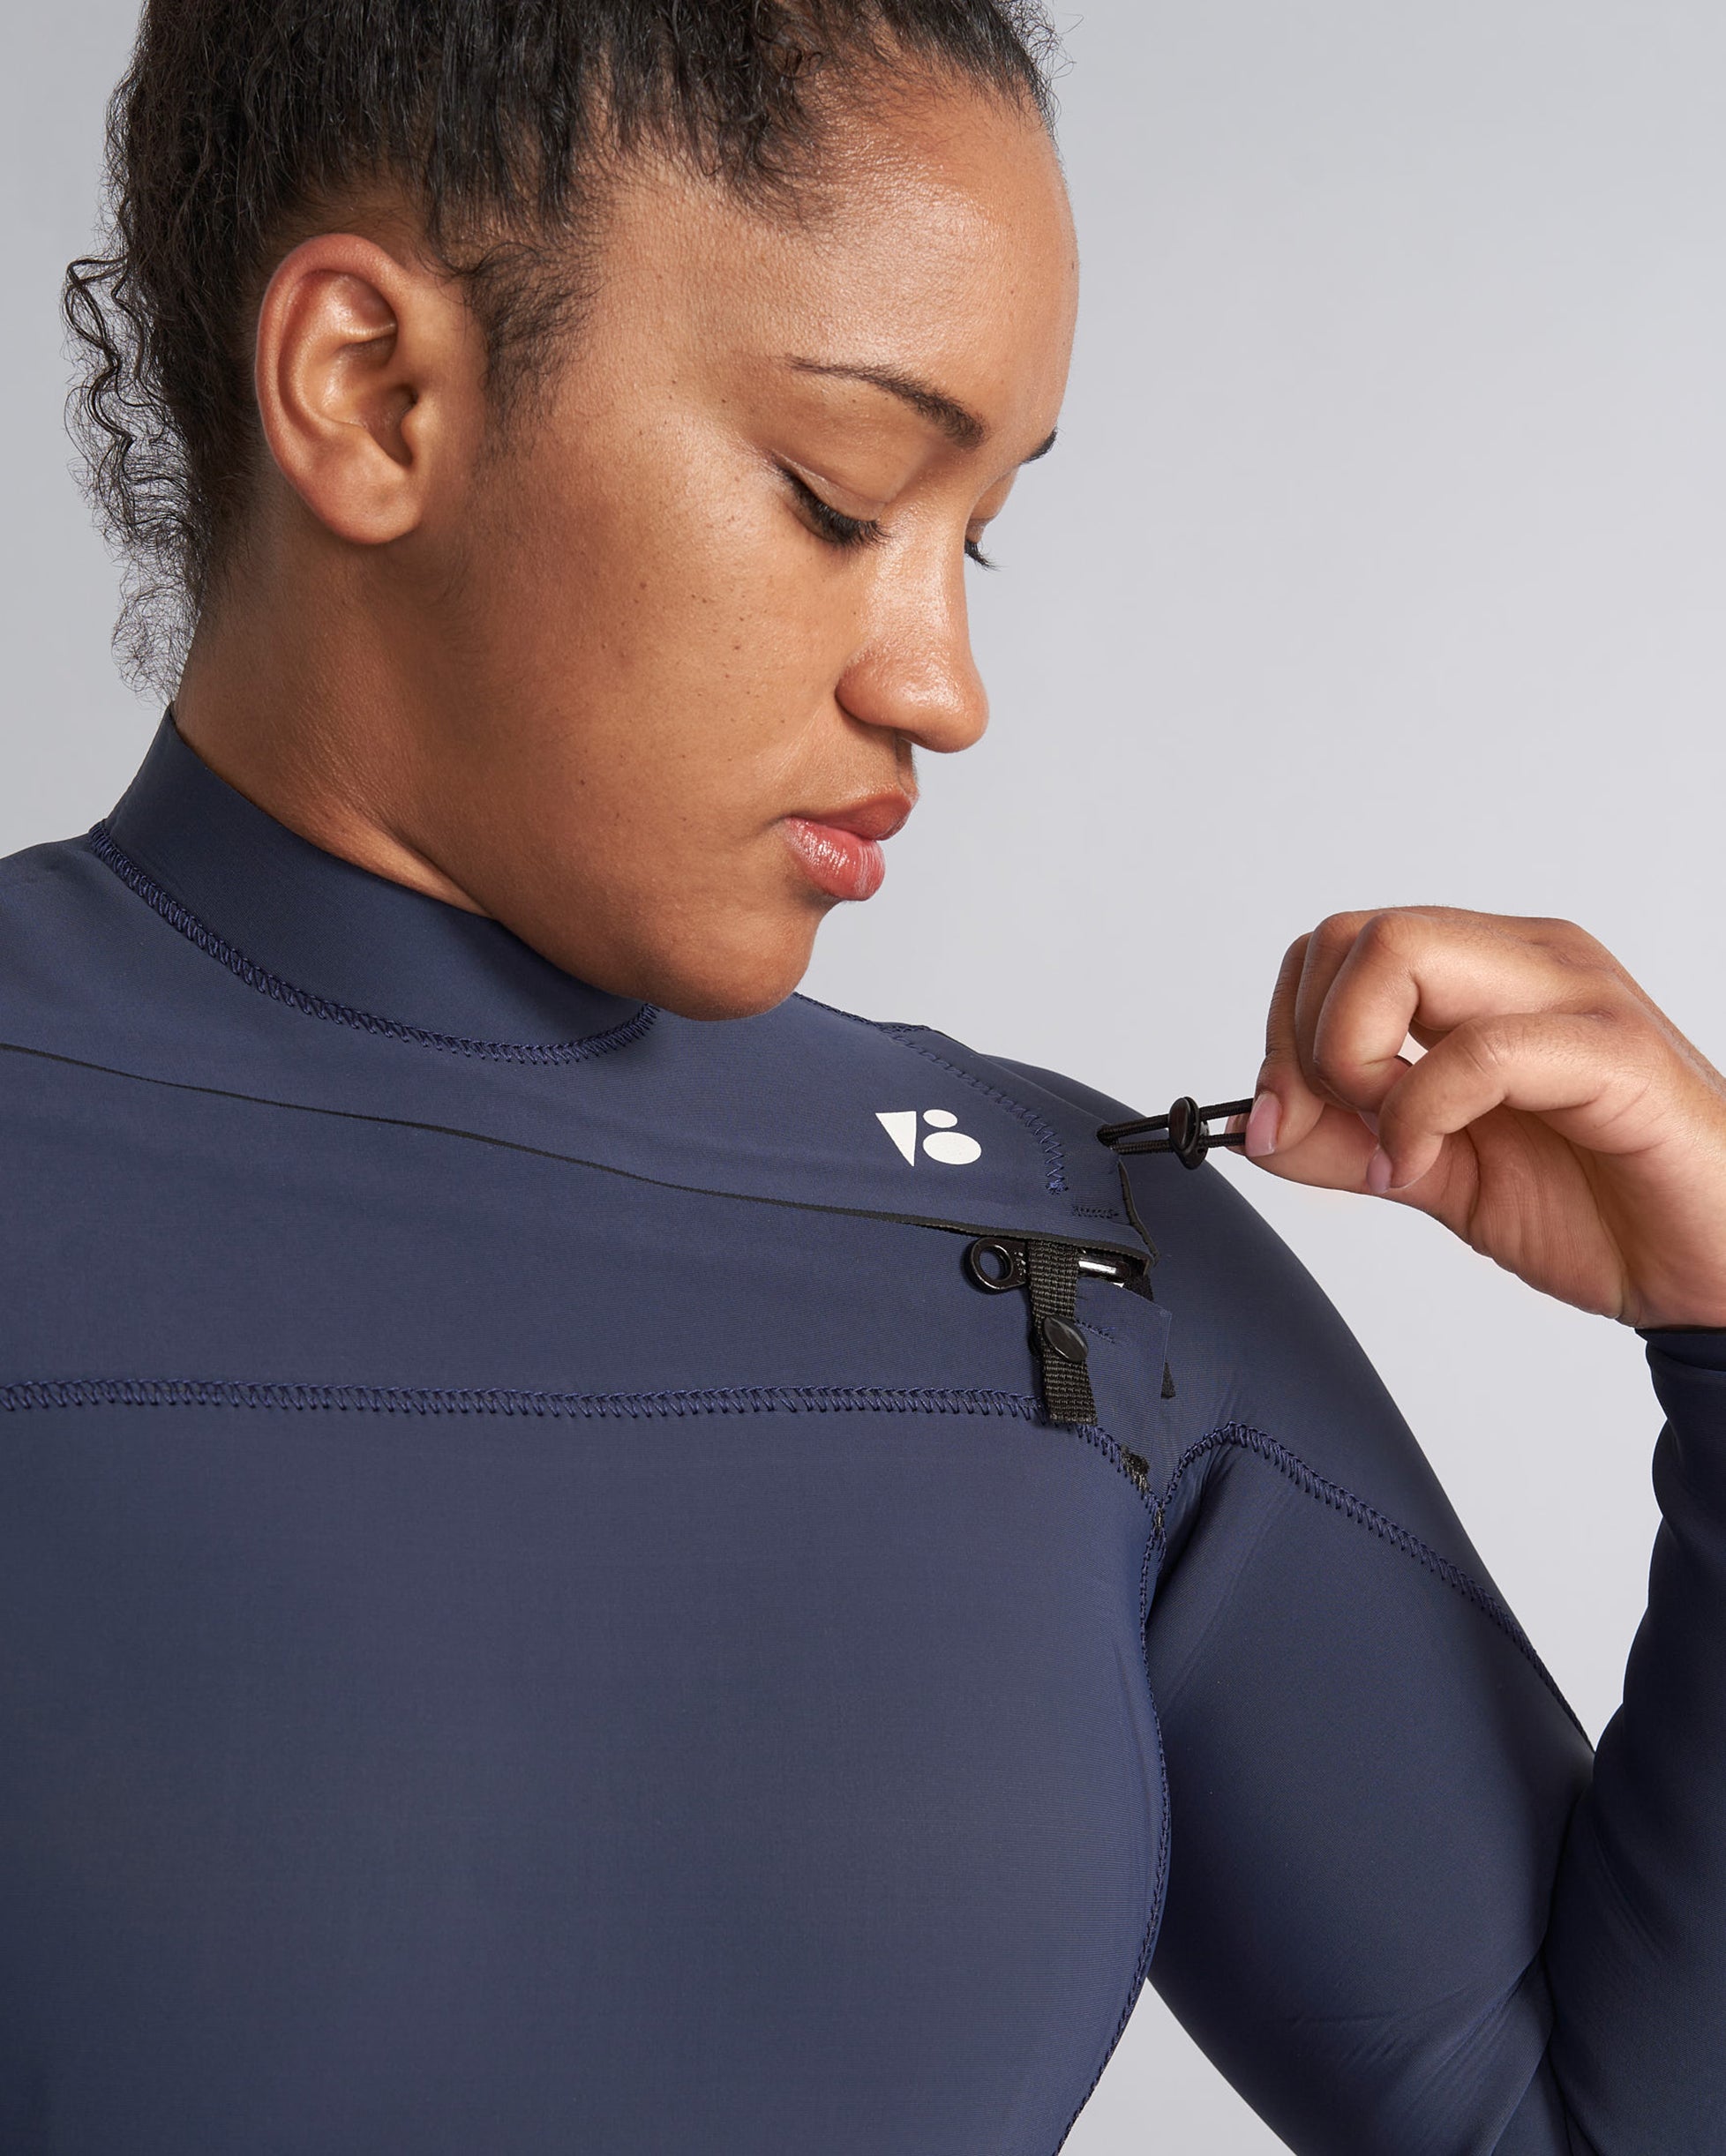 Custom Womens Two Piece Wetsuit – 7TILL8 Wetsuits